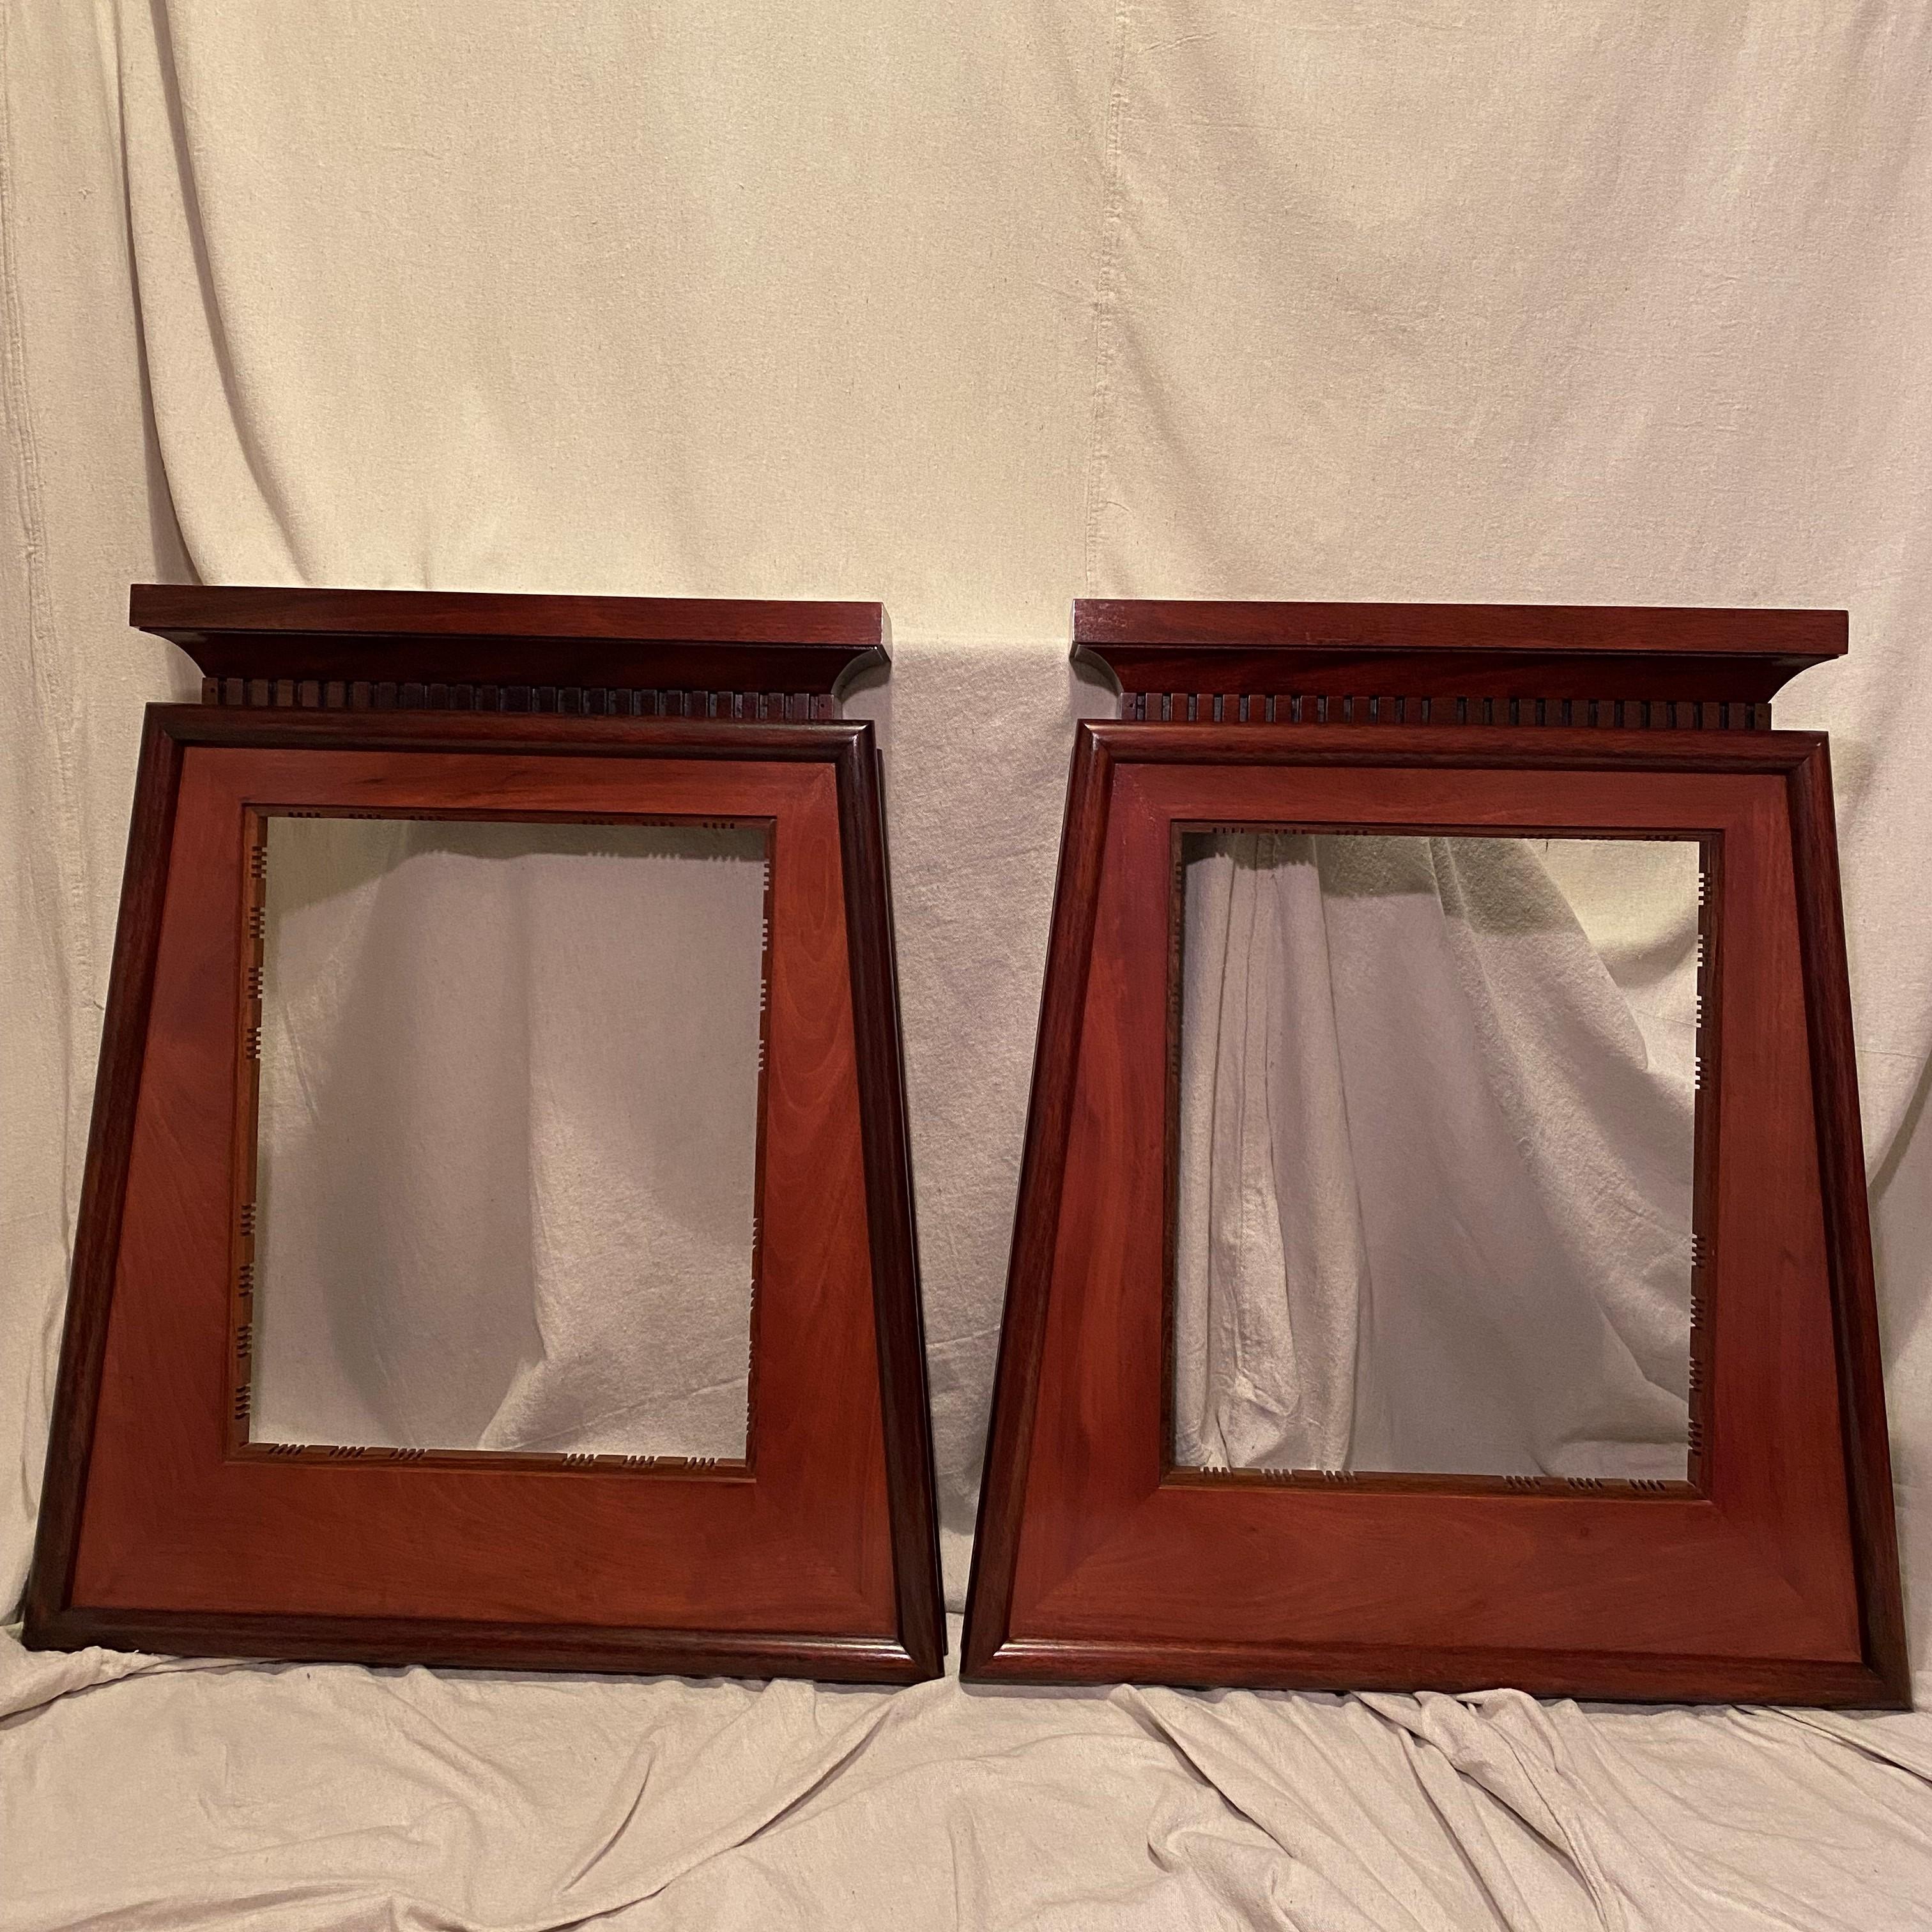 Two (of four) designed and handmade frames by Dana Nicholson at Altura Studio in New York. Solid Mahogany and rosewood assembled in a heavy torsion box method. Custom cast brass fittings for hanging and for supporting the removable mahogany art